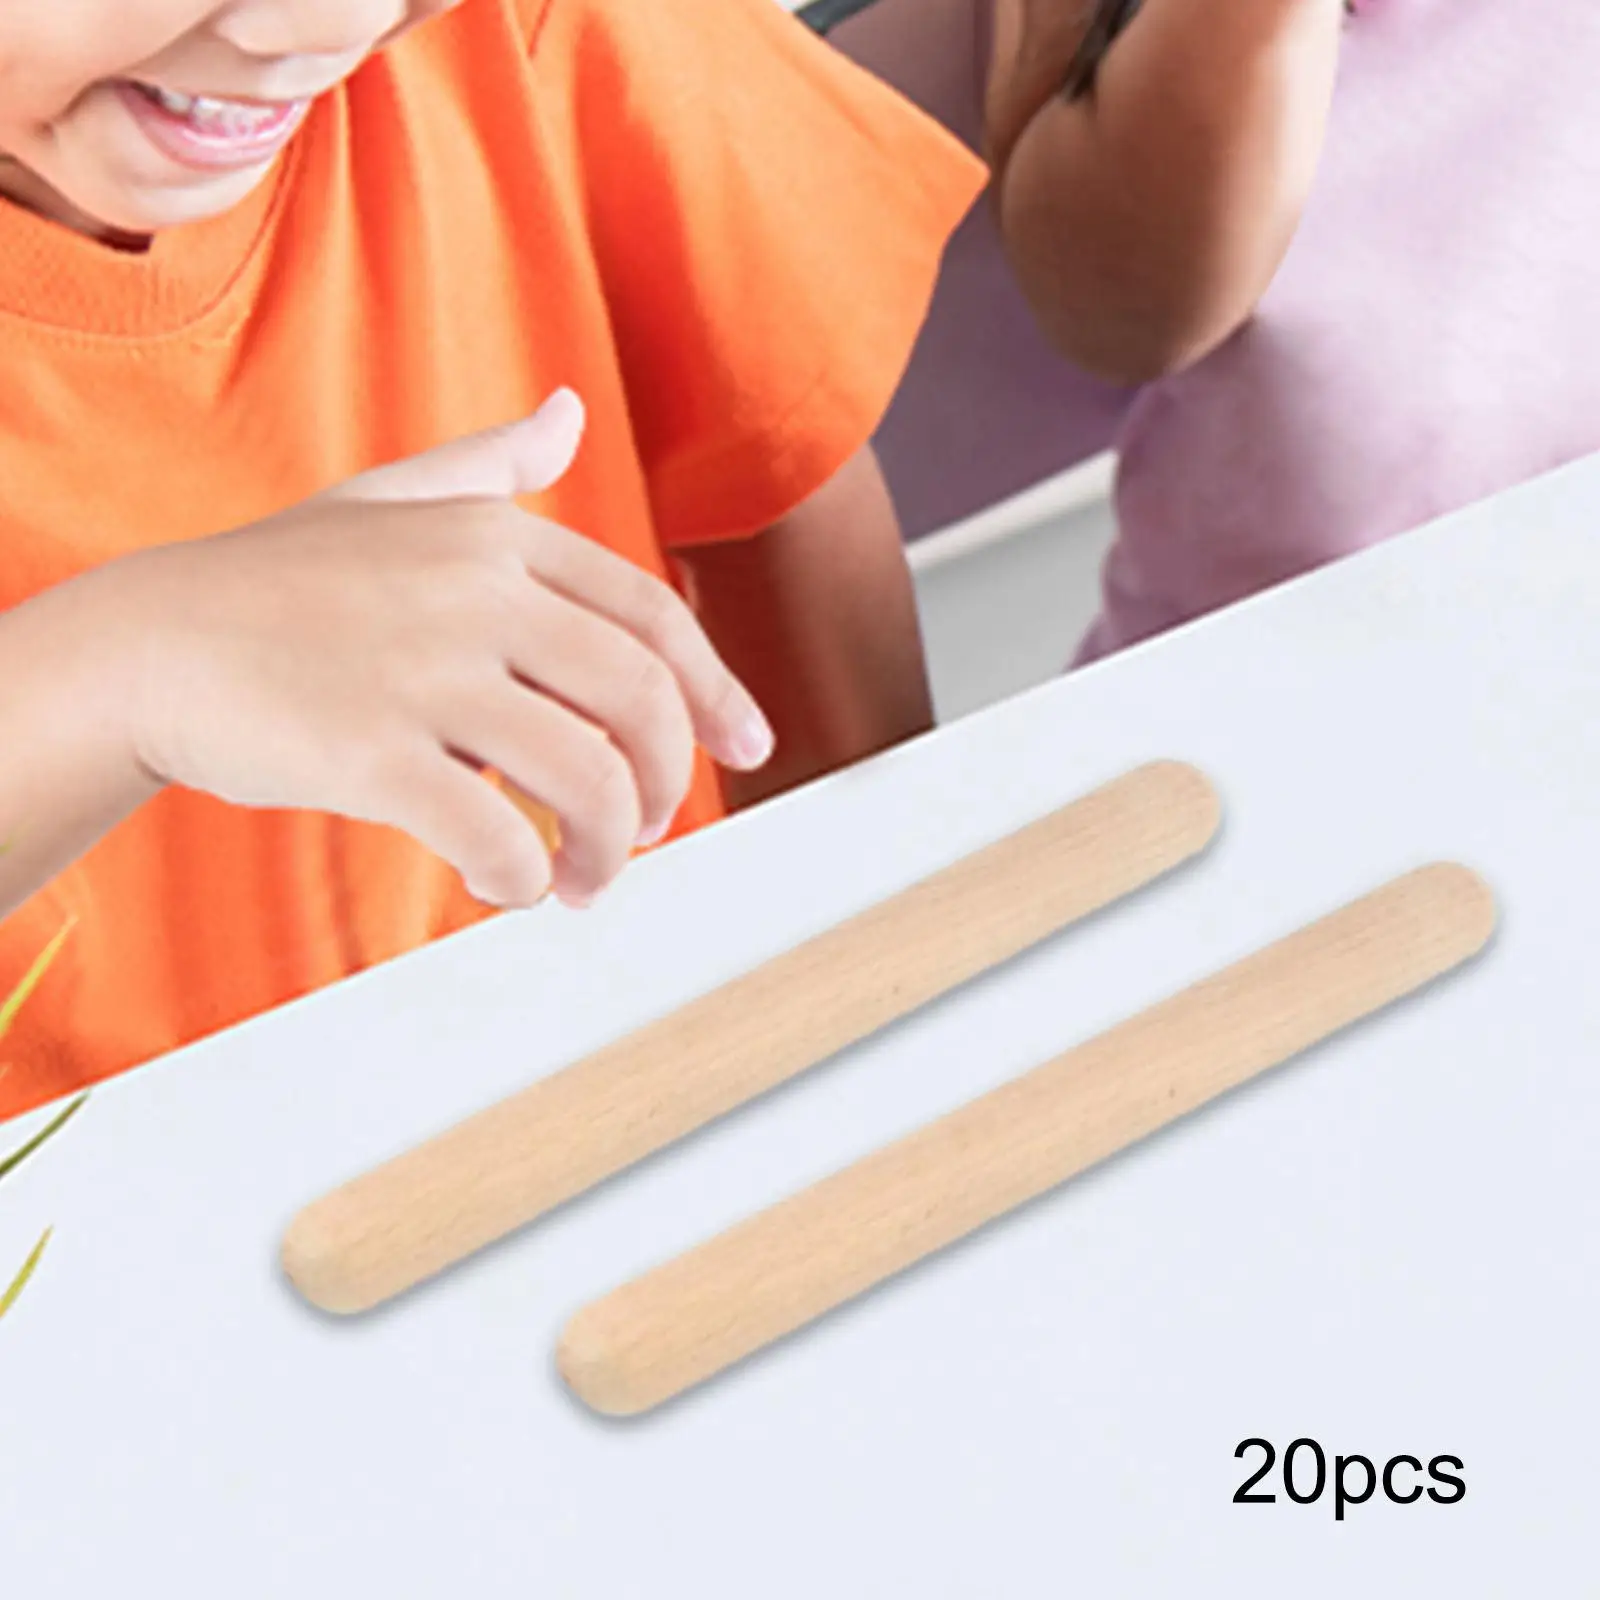 

20Pcs Wood Rhythm Sticks Percussion Toy Teaching Aid Easy to Use Baby Instruments Rhythm Toy Musical Educational Toy for Kids